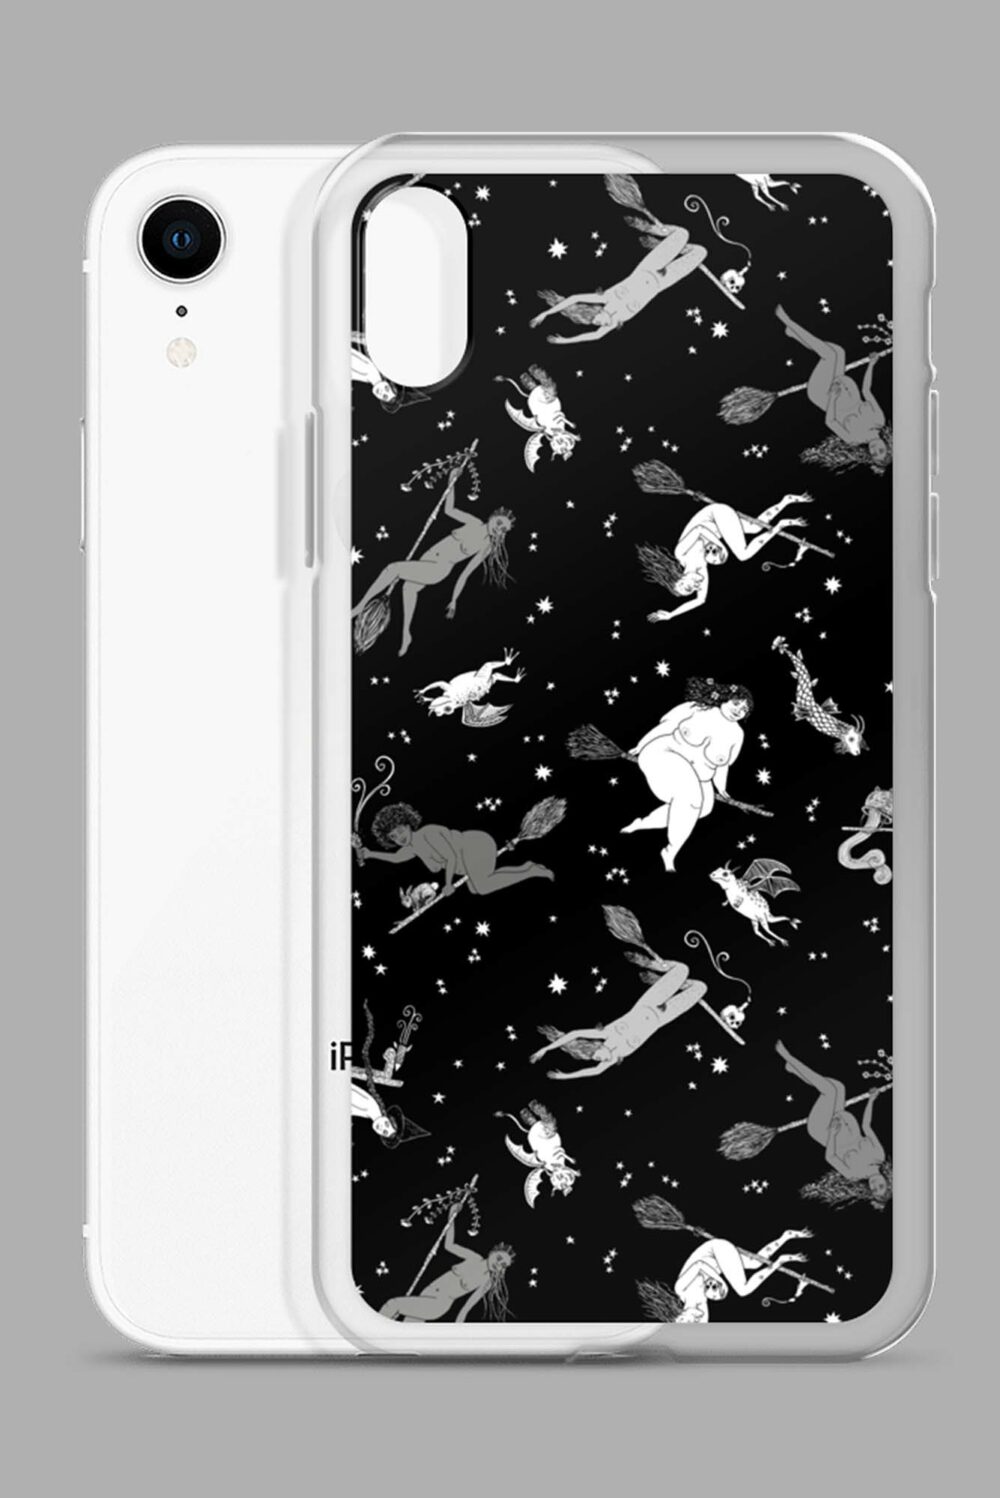 cosmic drifters intersectional witches clear case for iphone iphone xr case with phone 64e2679fe3c24